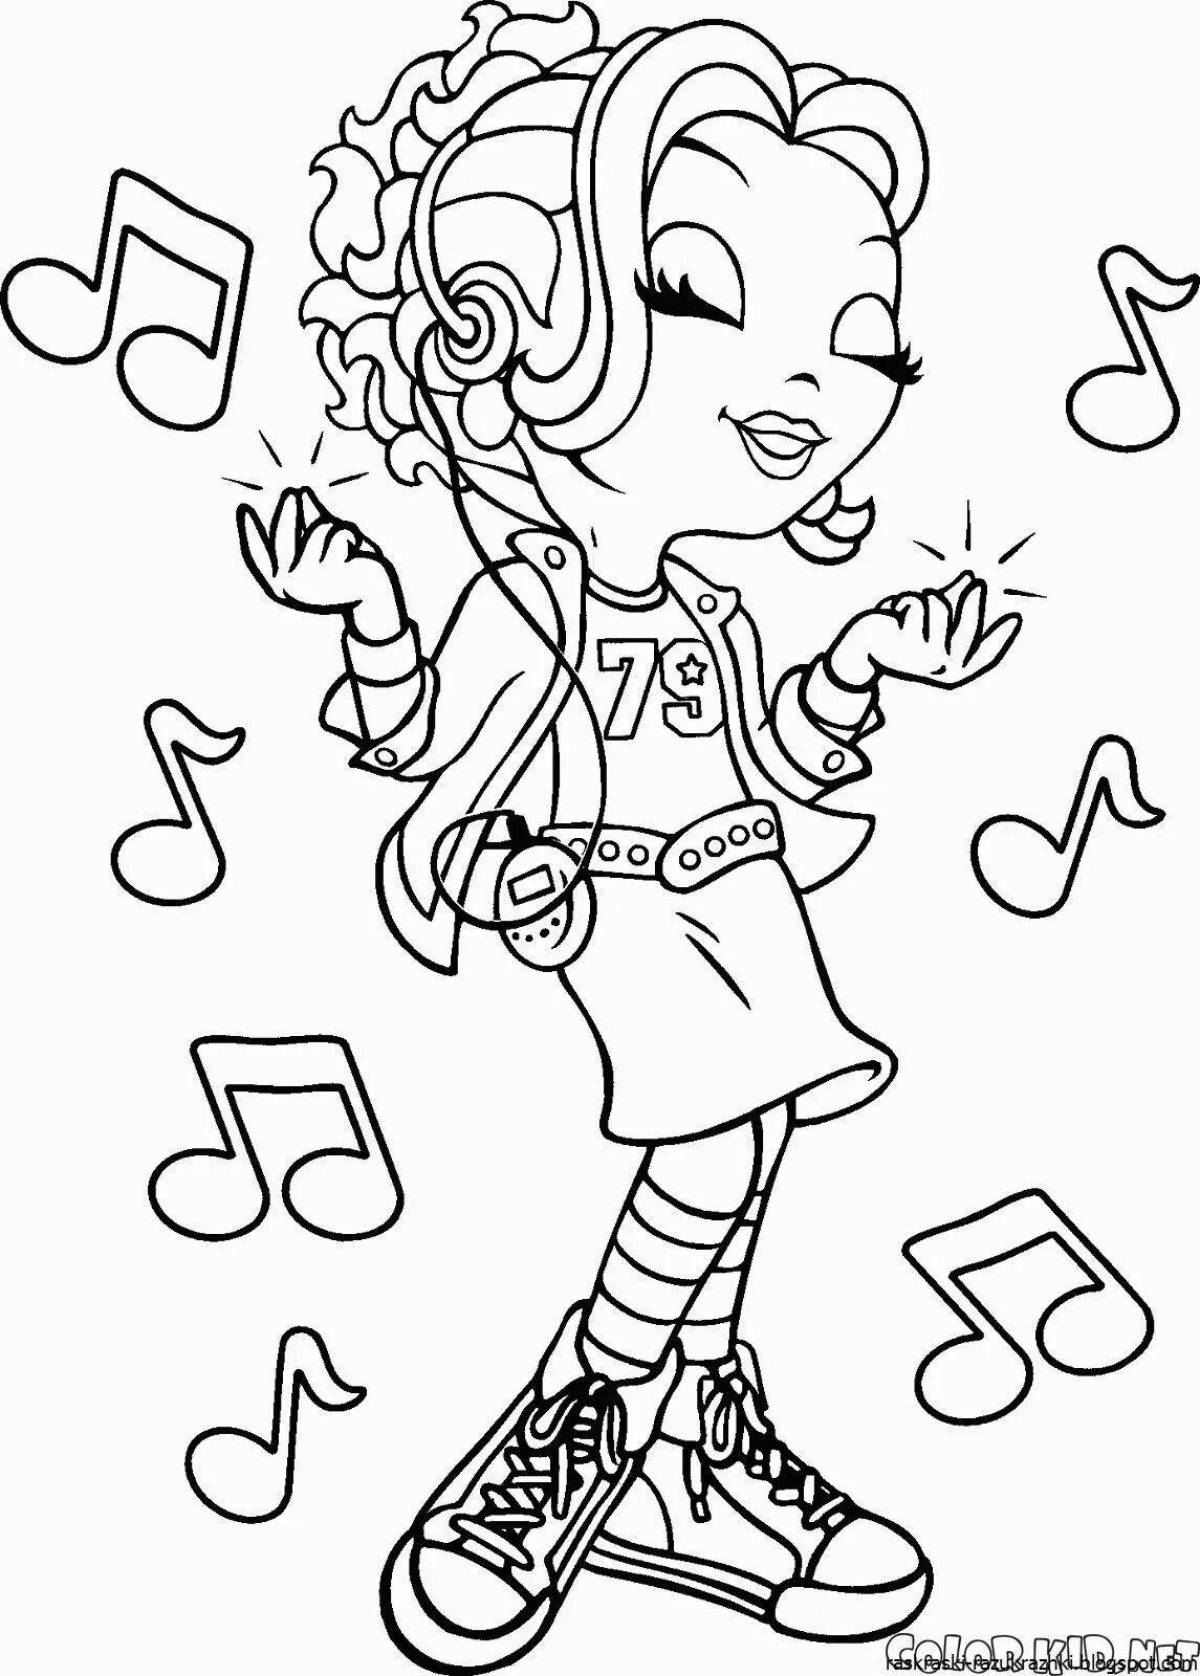 Color-frenzy coloring page for 18 year old girls